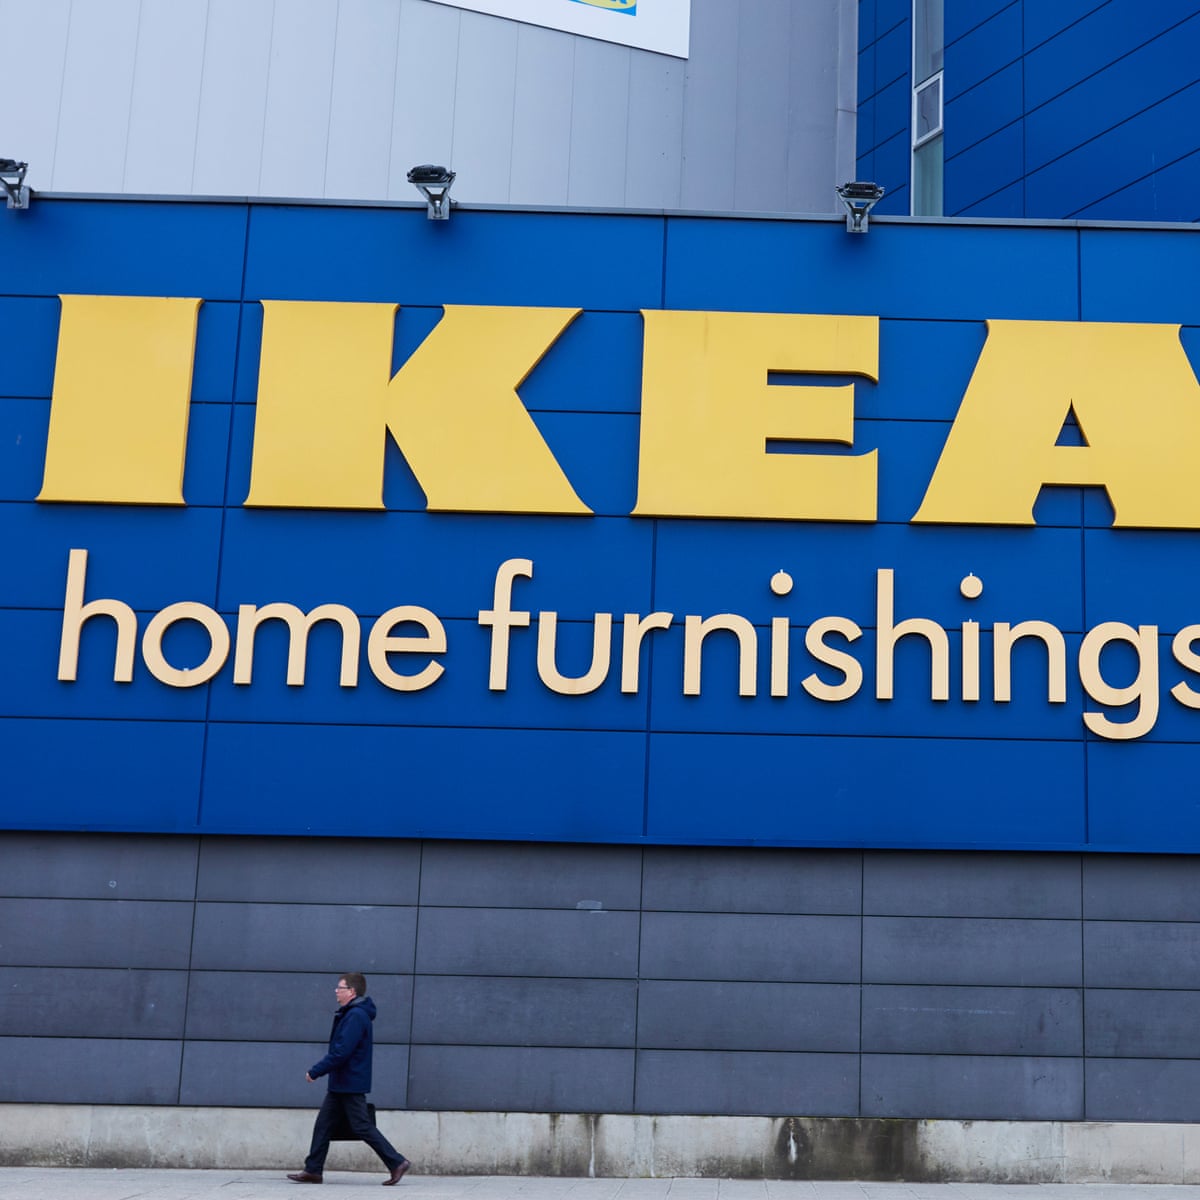 Ikea To Close First Big Uk Store Putting 350 Jobs At Risk Business The Guardian,Most Googled Question Right Now